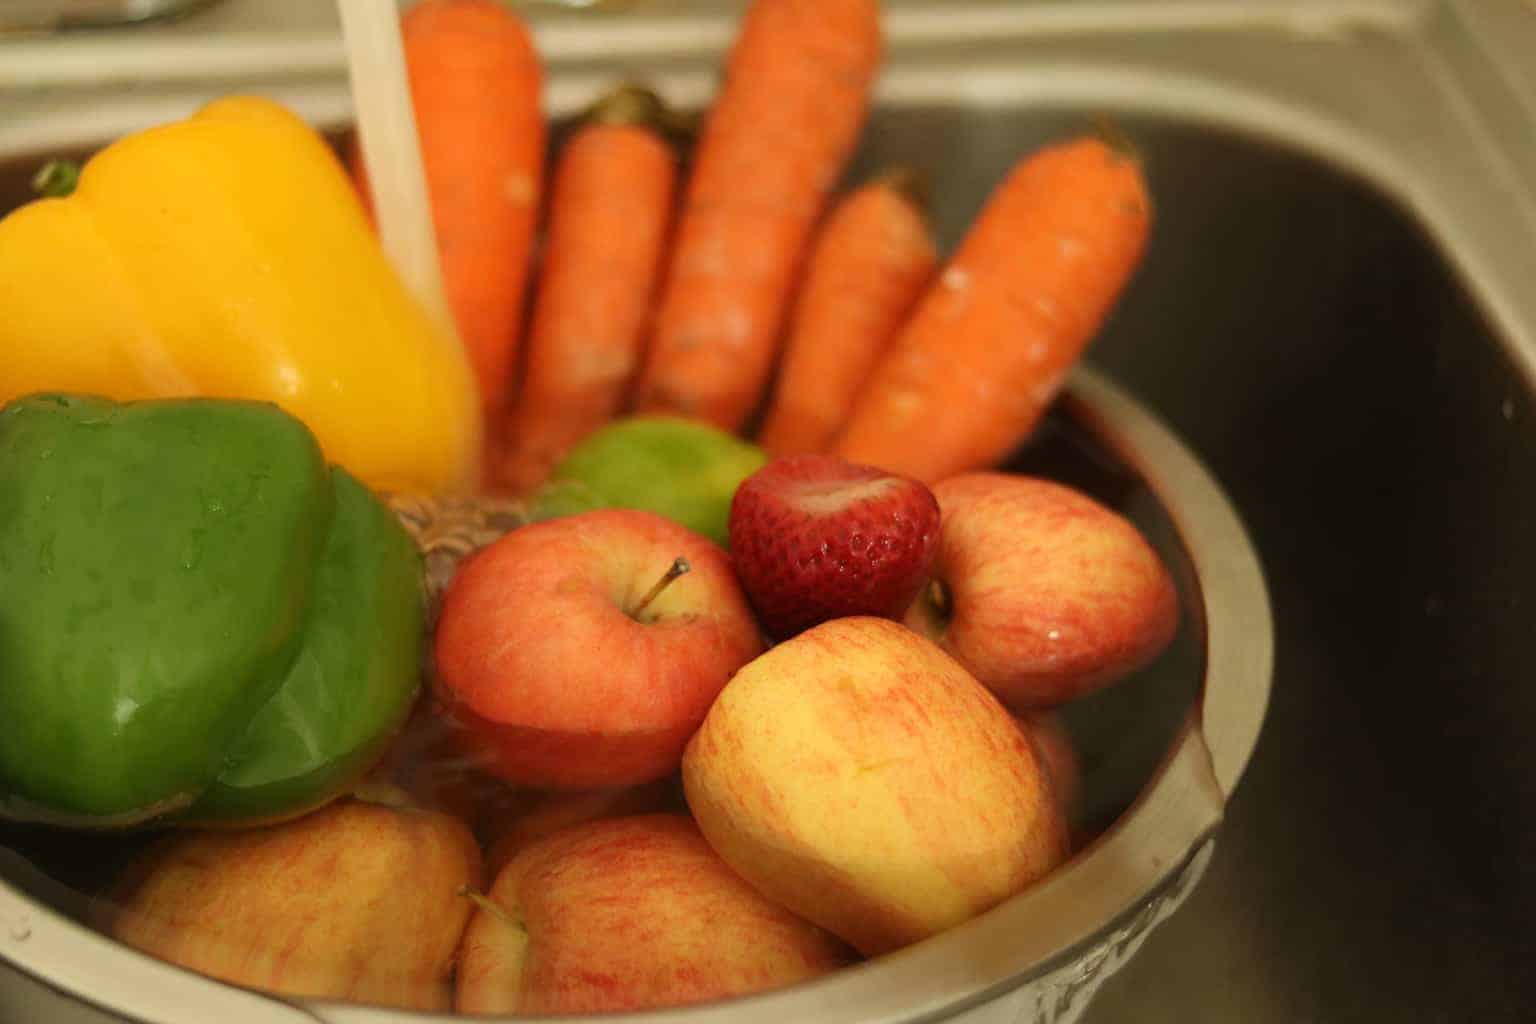 Fruit and vegetables in sink under running water.